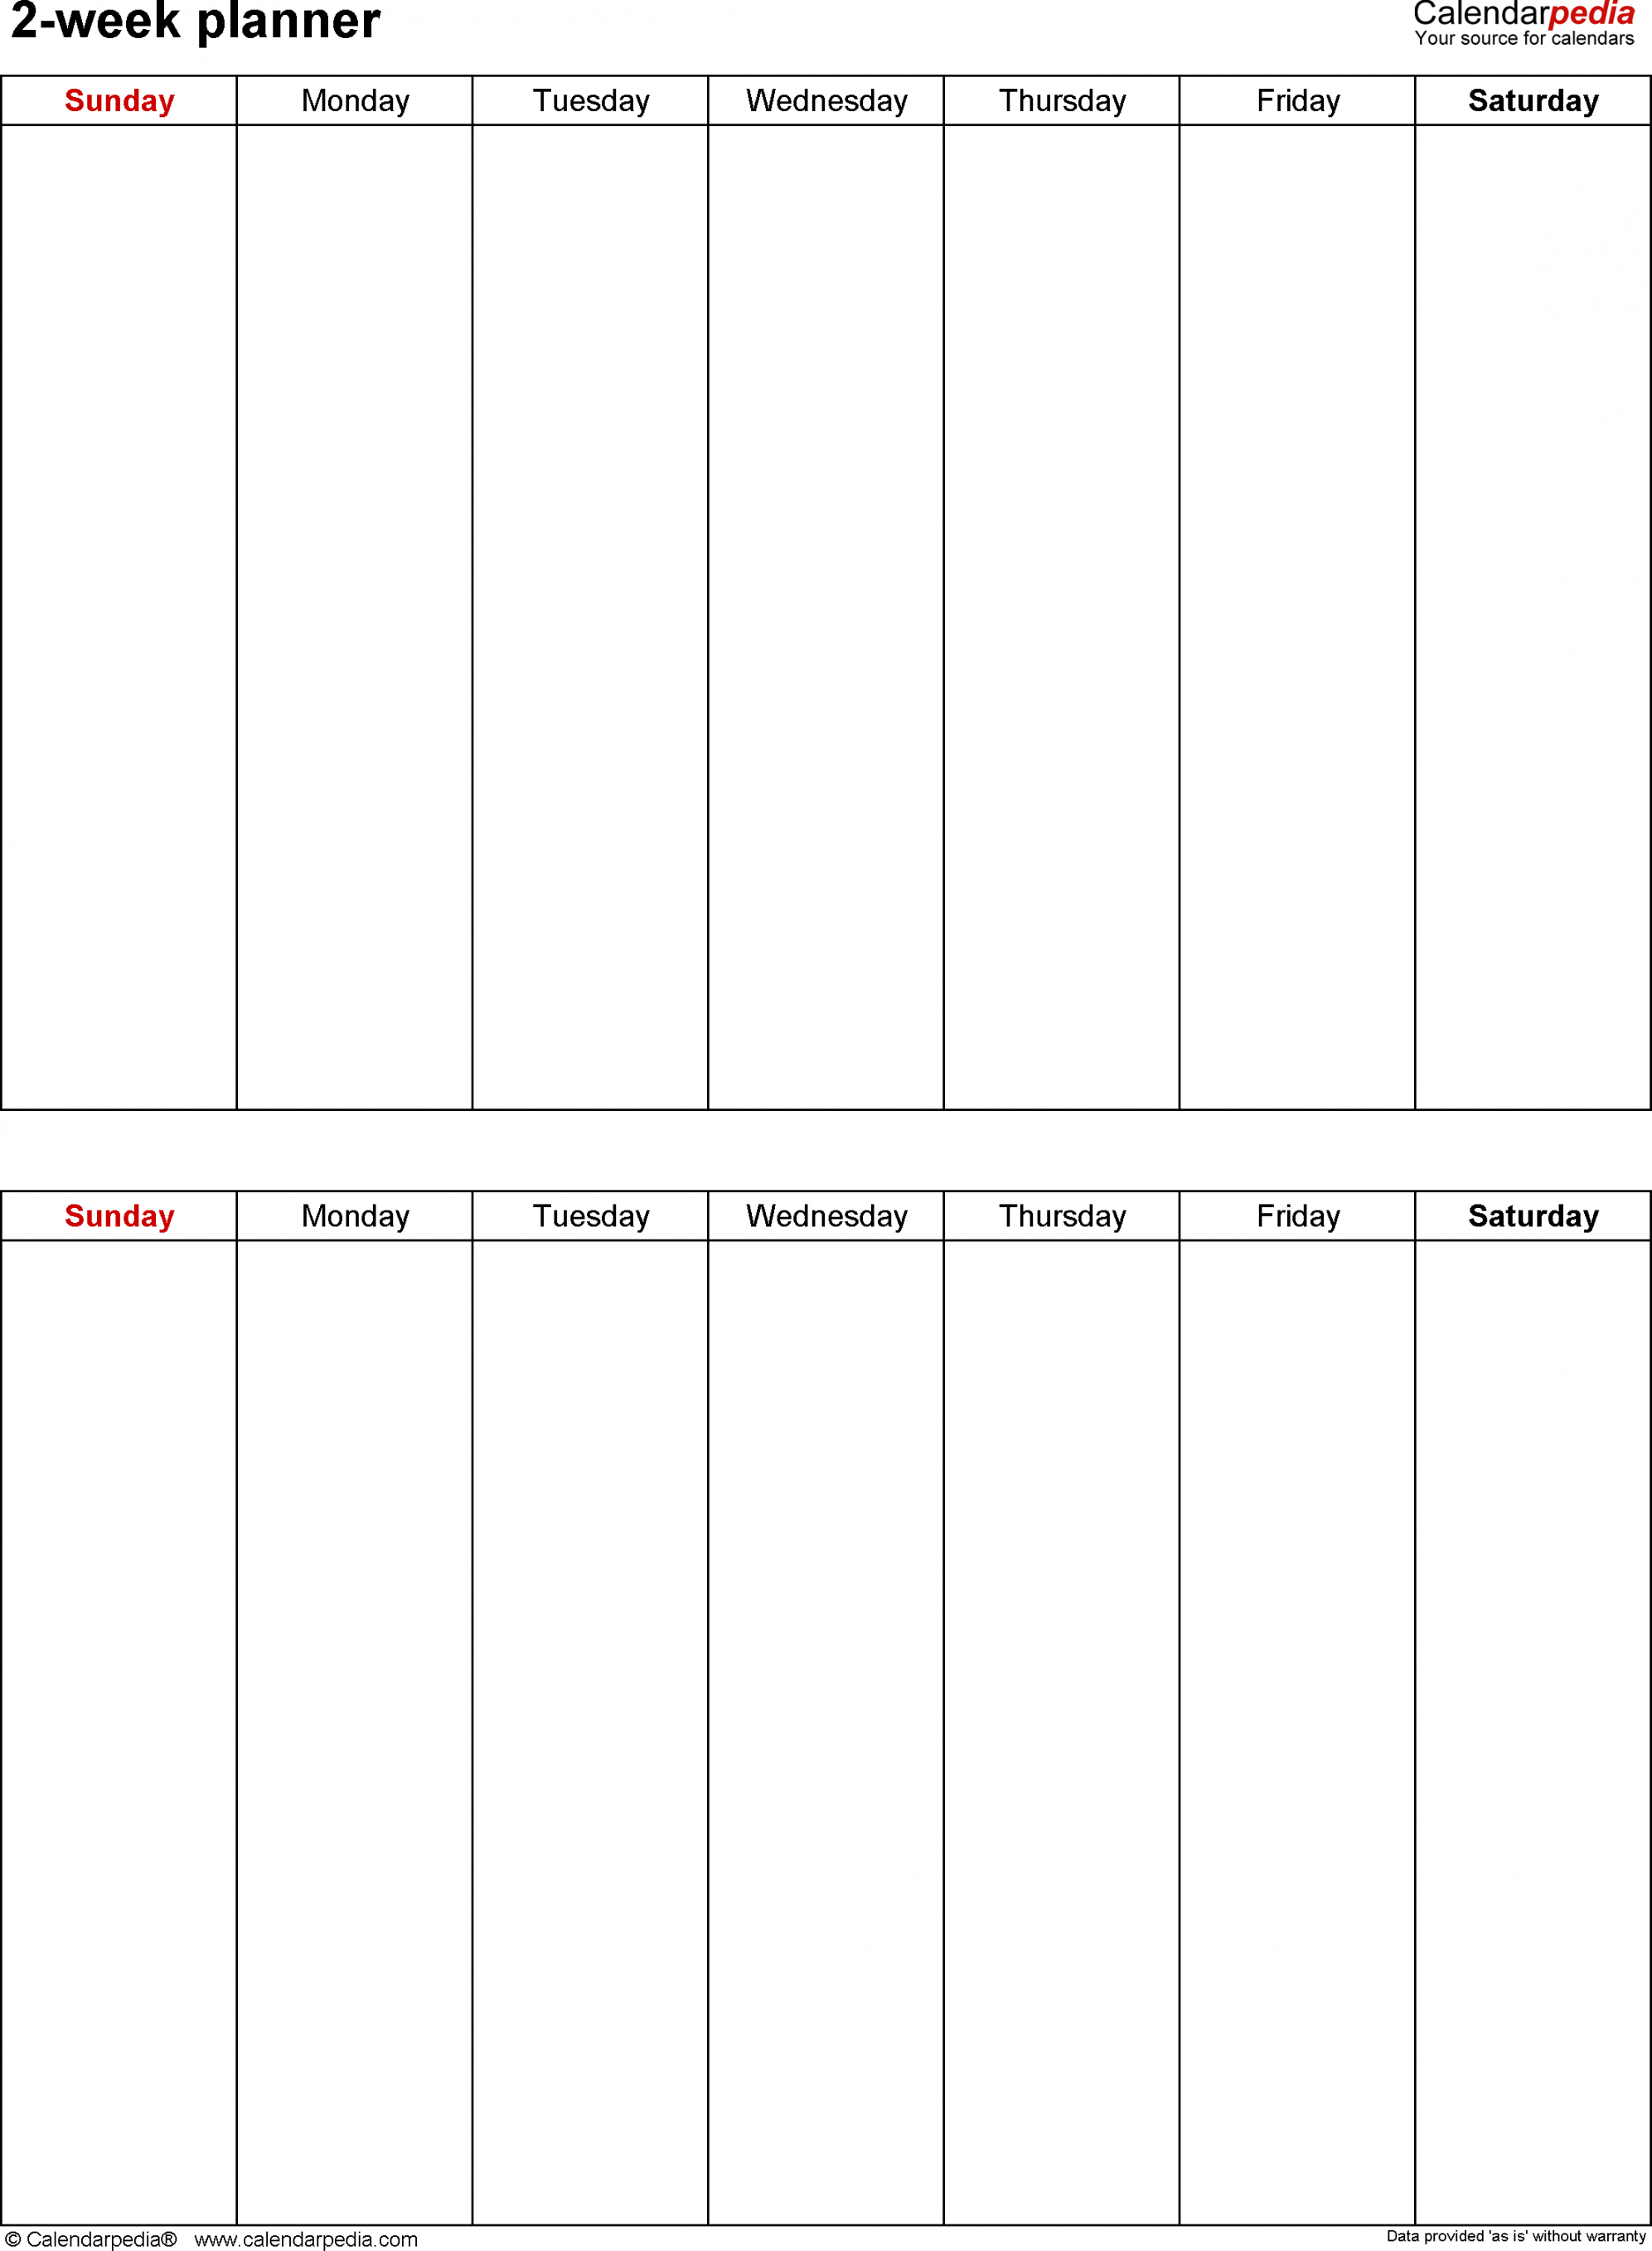 Free Weekly Planners in PDF format - + Templates